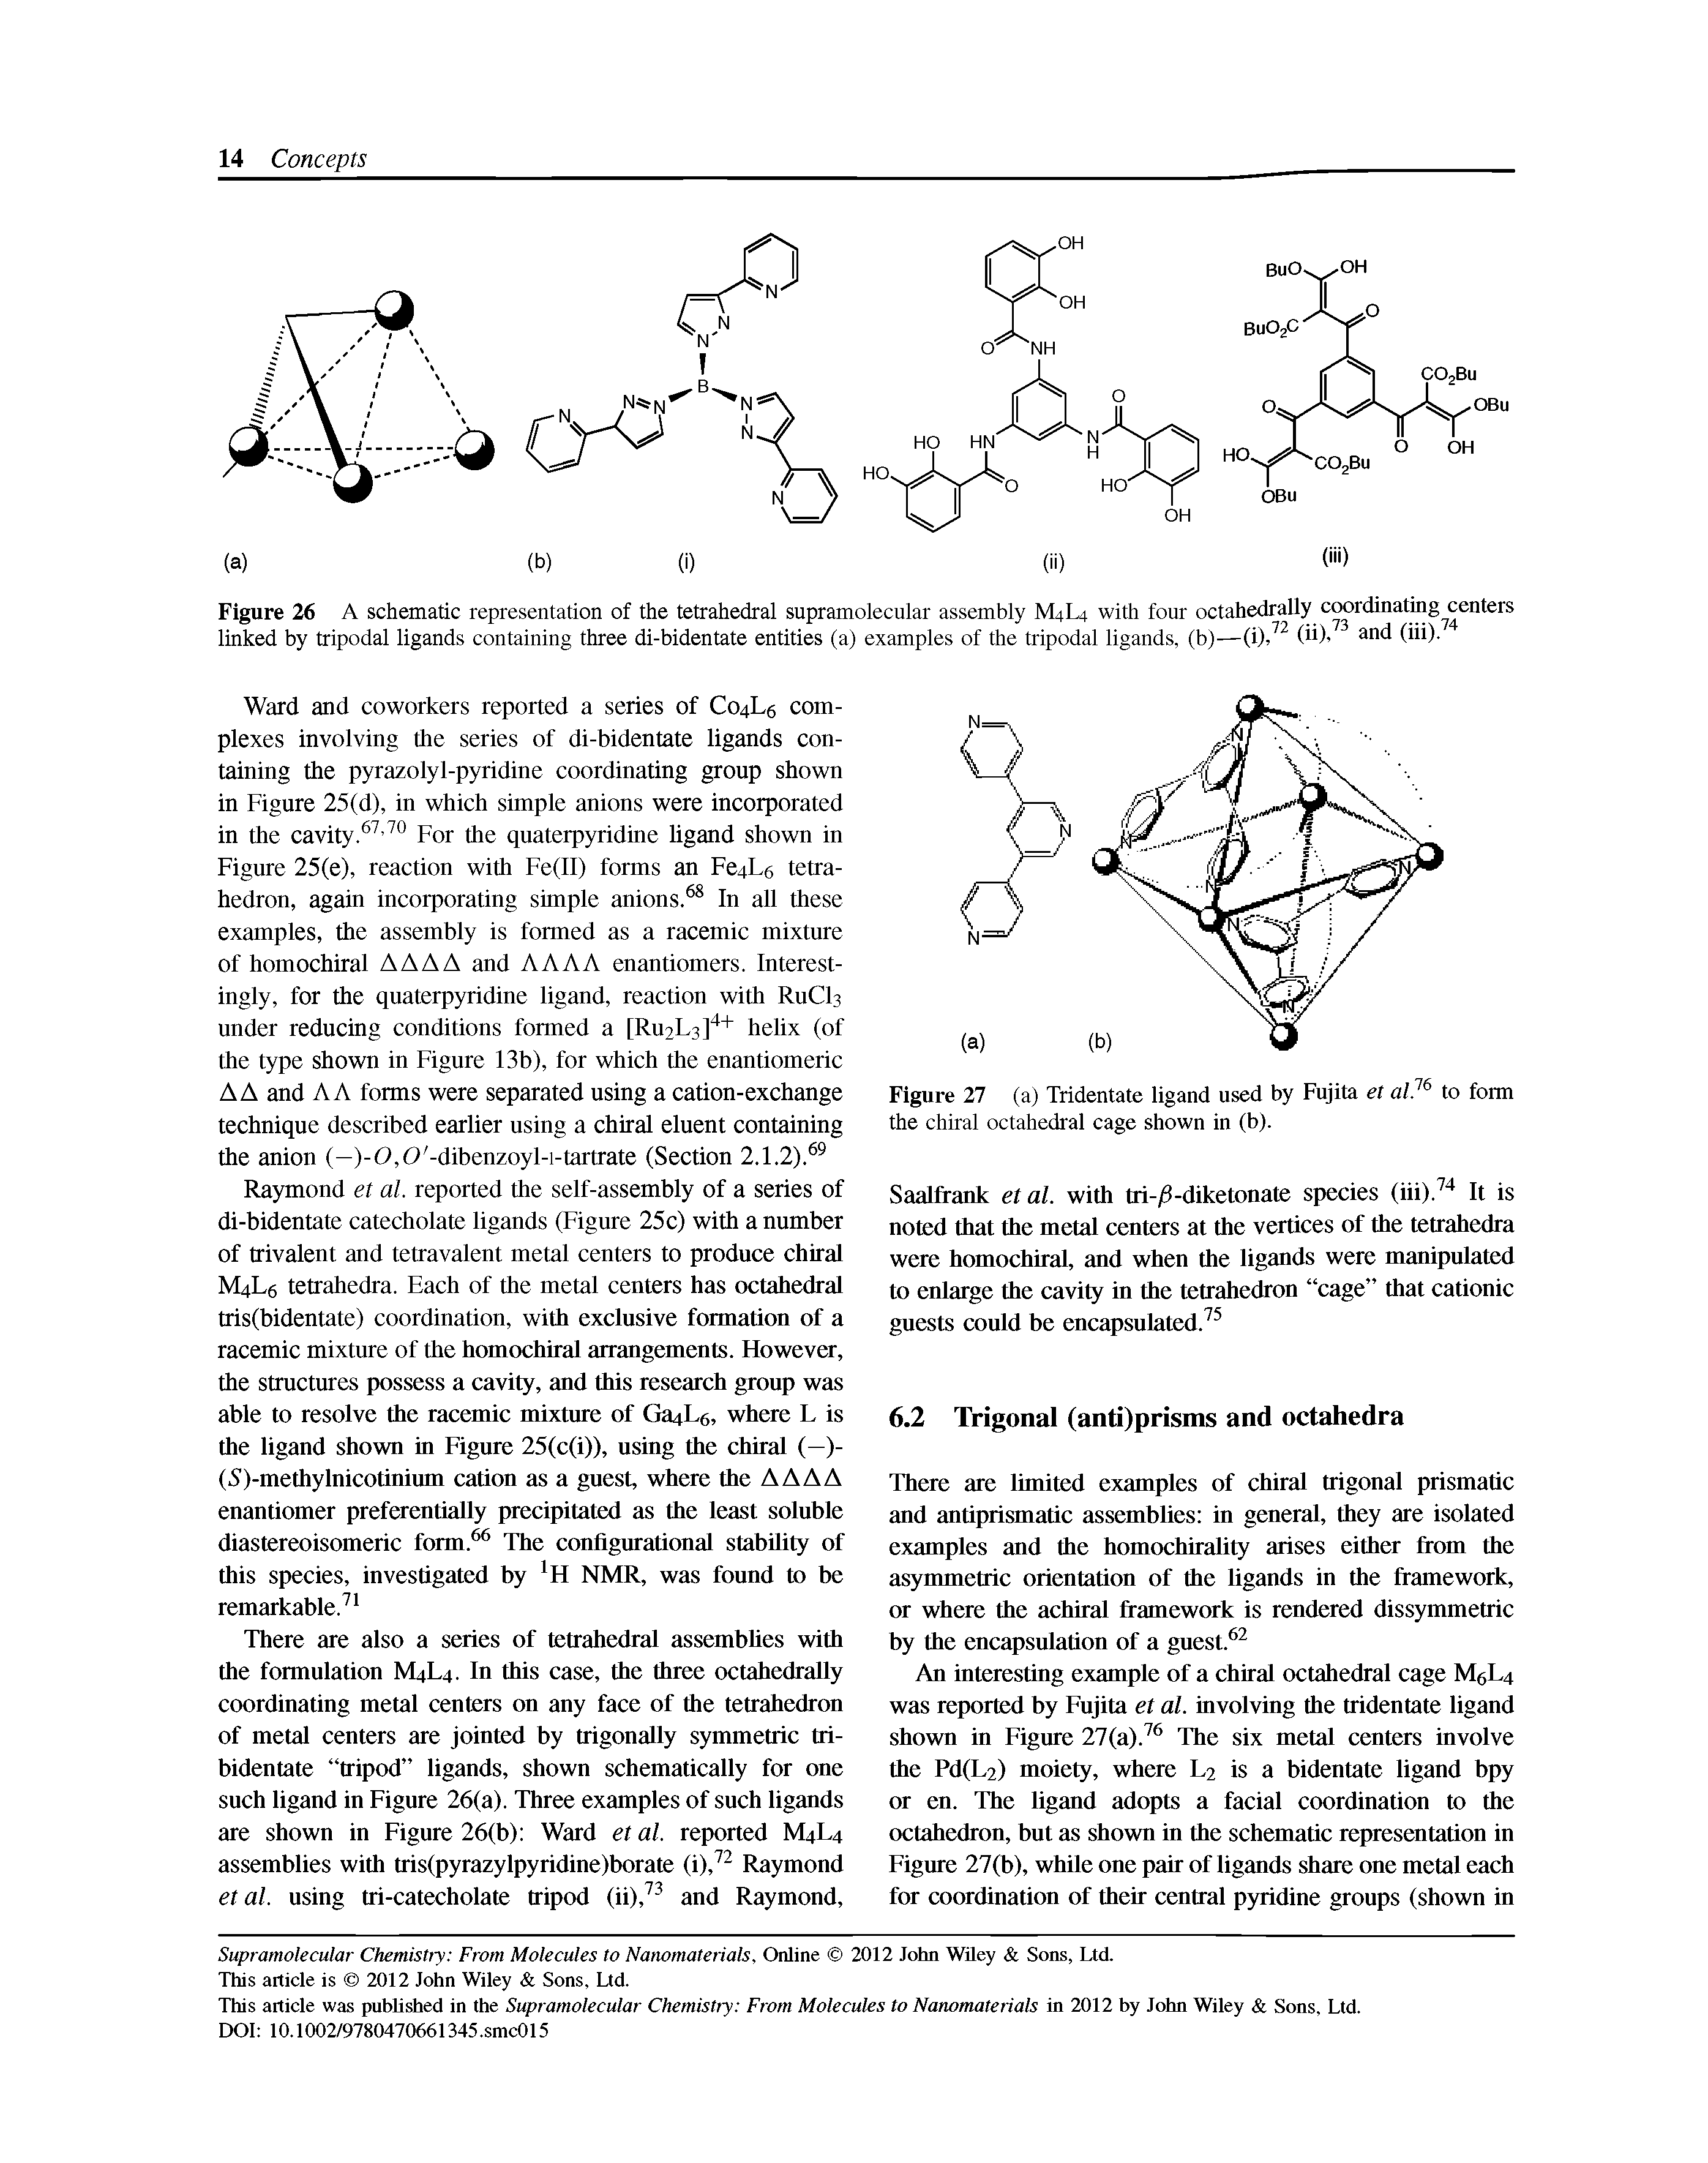 Figure 26 A schematic representation of the tetrahedral supramolecnlar assembly M4L4 with fonr octahedrally coordinating centers linked by tripodal ligands containing three di-bidentate entities (a) examples of the tripodal ligands, (b)—(i), (ii)/ and (iii)7" ...